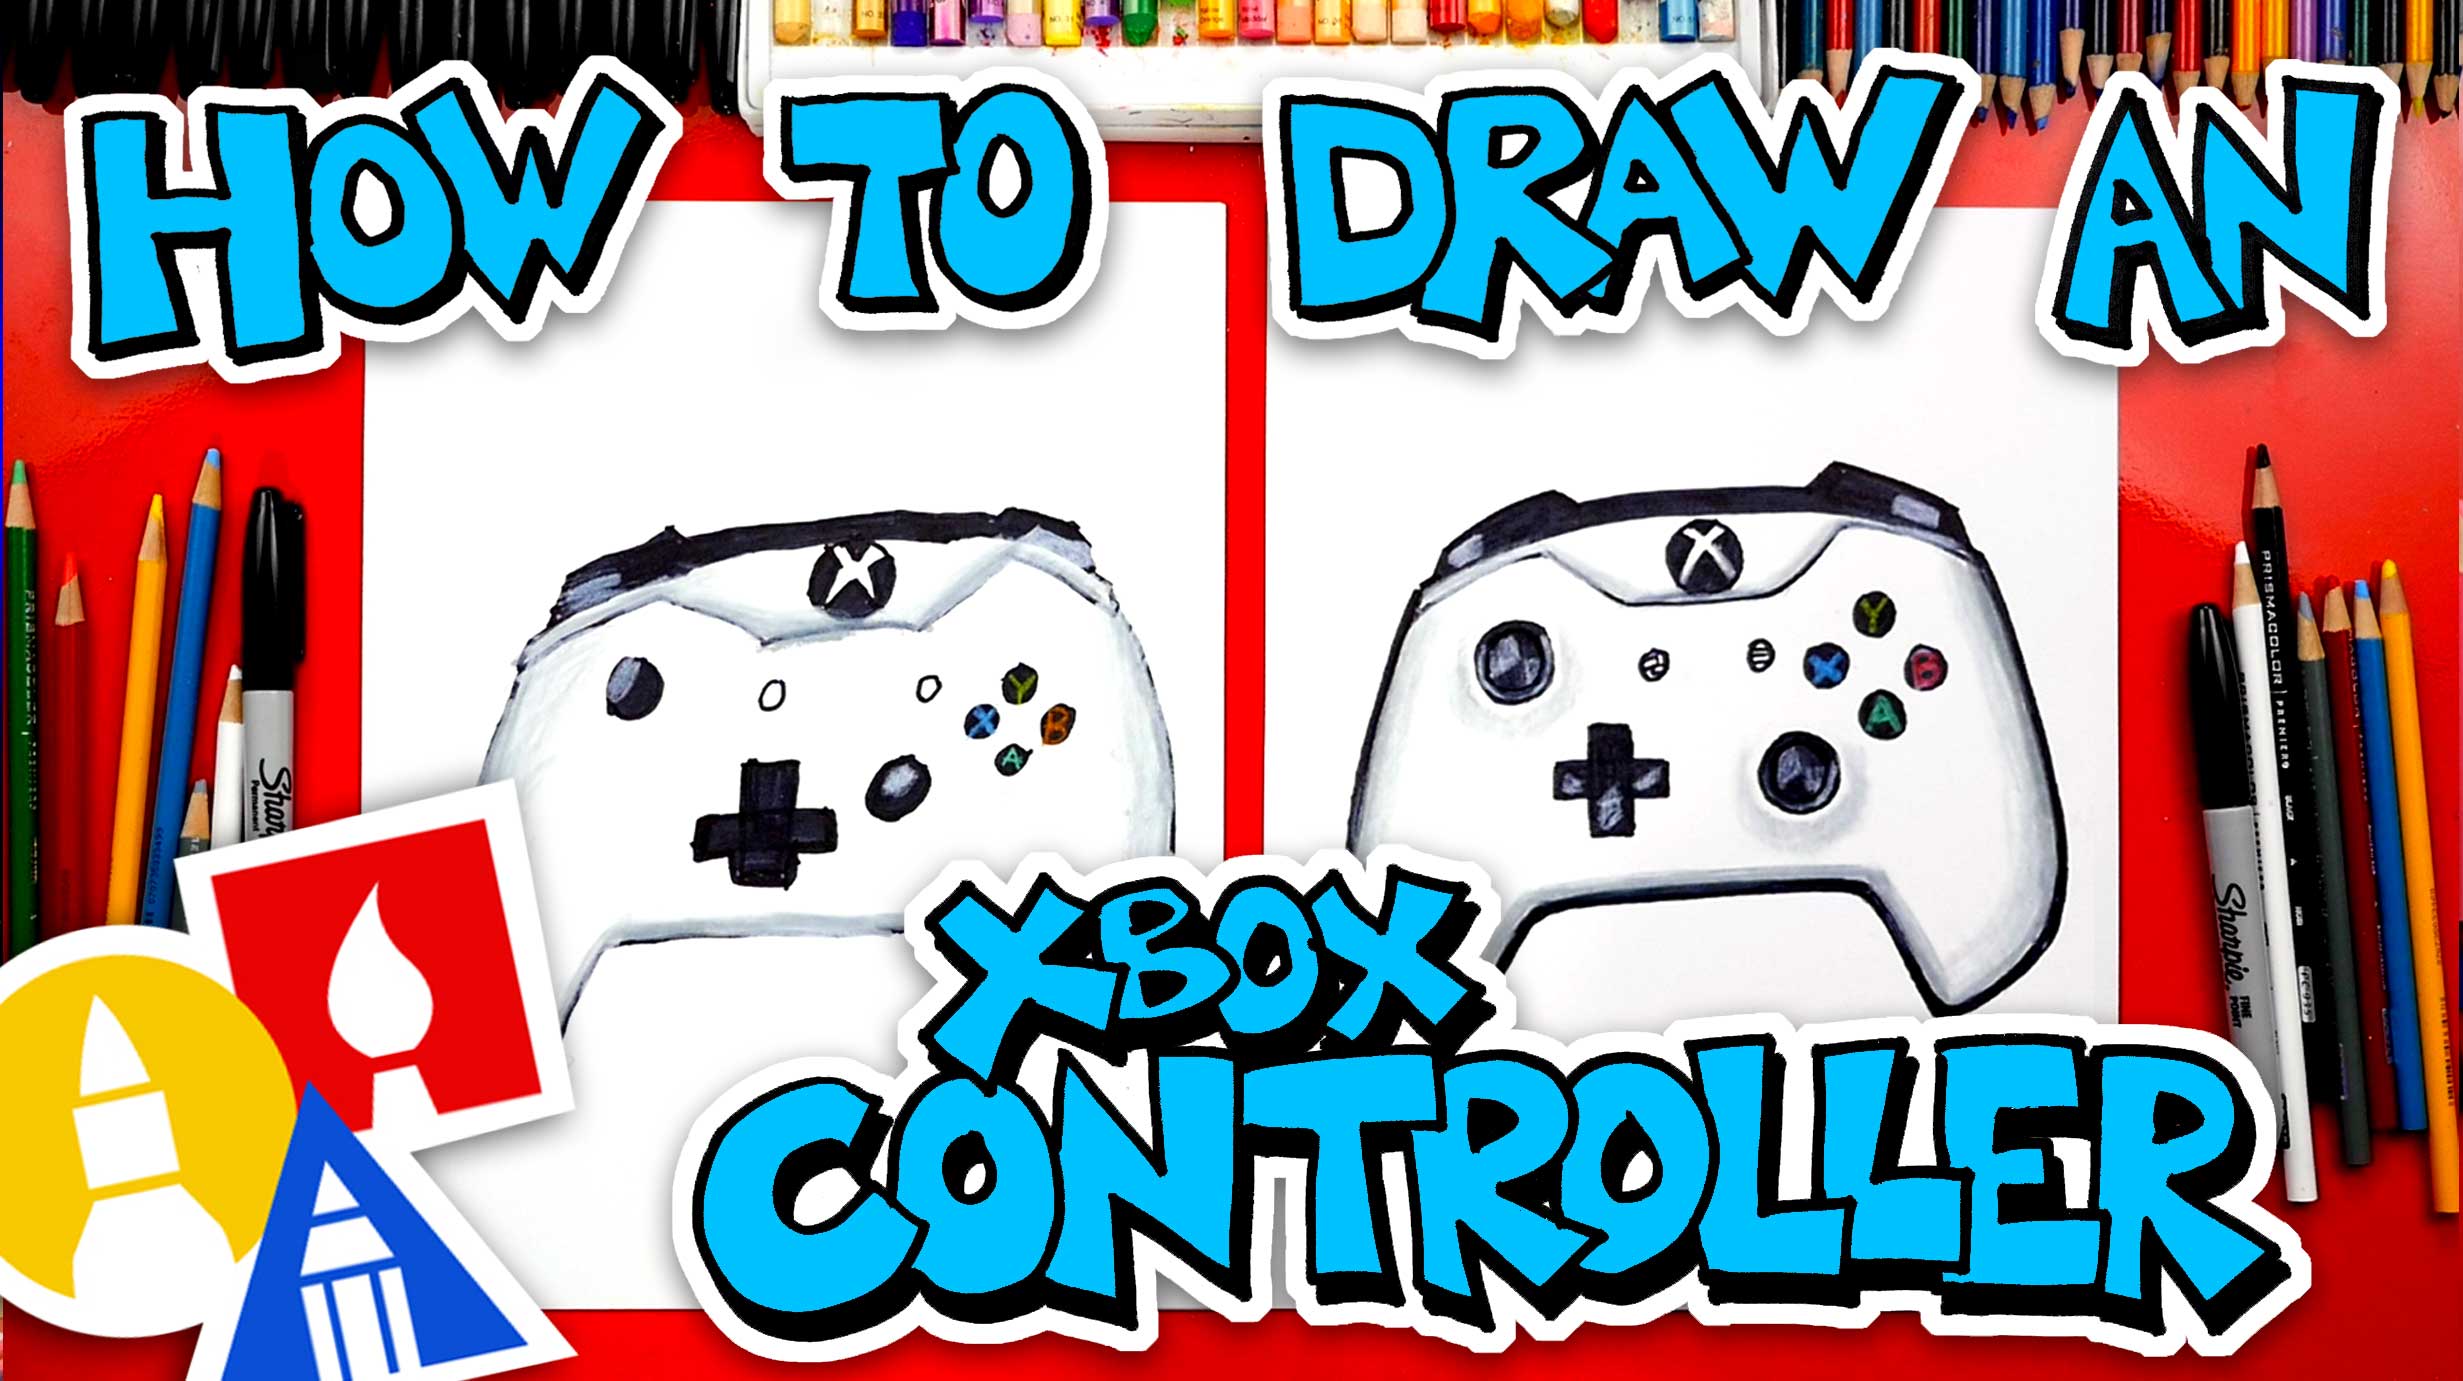 How To Draw A Xbox Controller Step By Step How to draw playstation